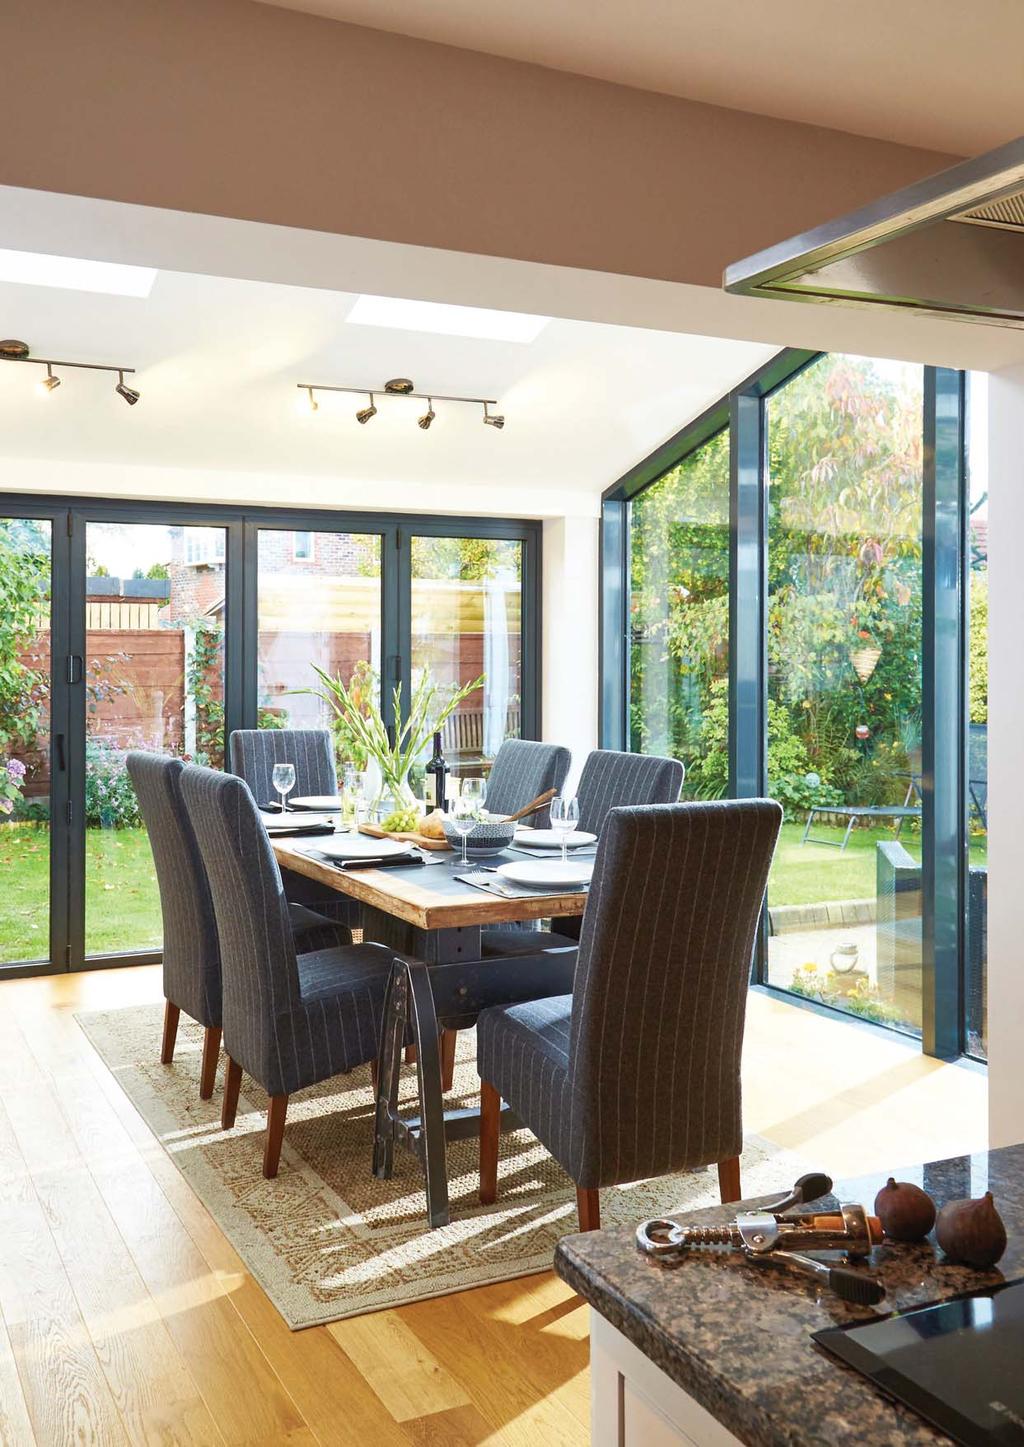 Whatever your reasons for wanting additional space, a home extension brings all sorts of benefits... and can also mean lots of hassle, with frustrating red tape, escalating costs and building mess.